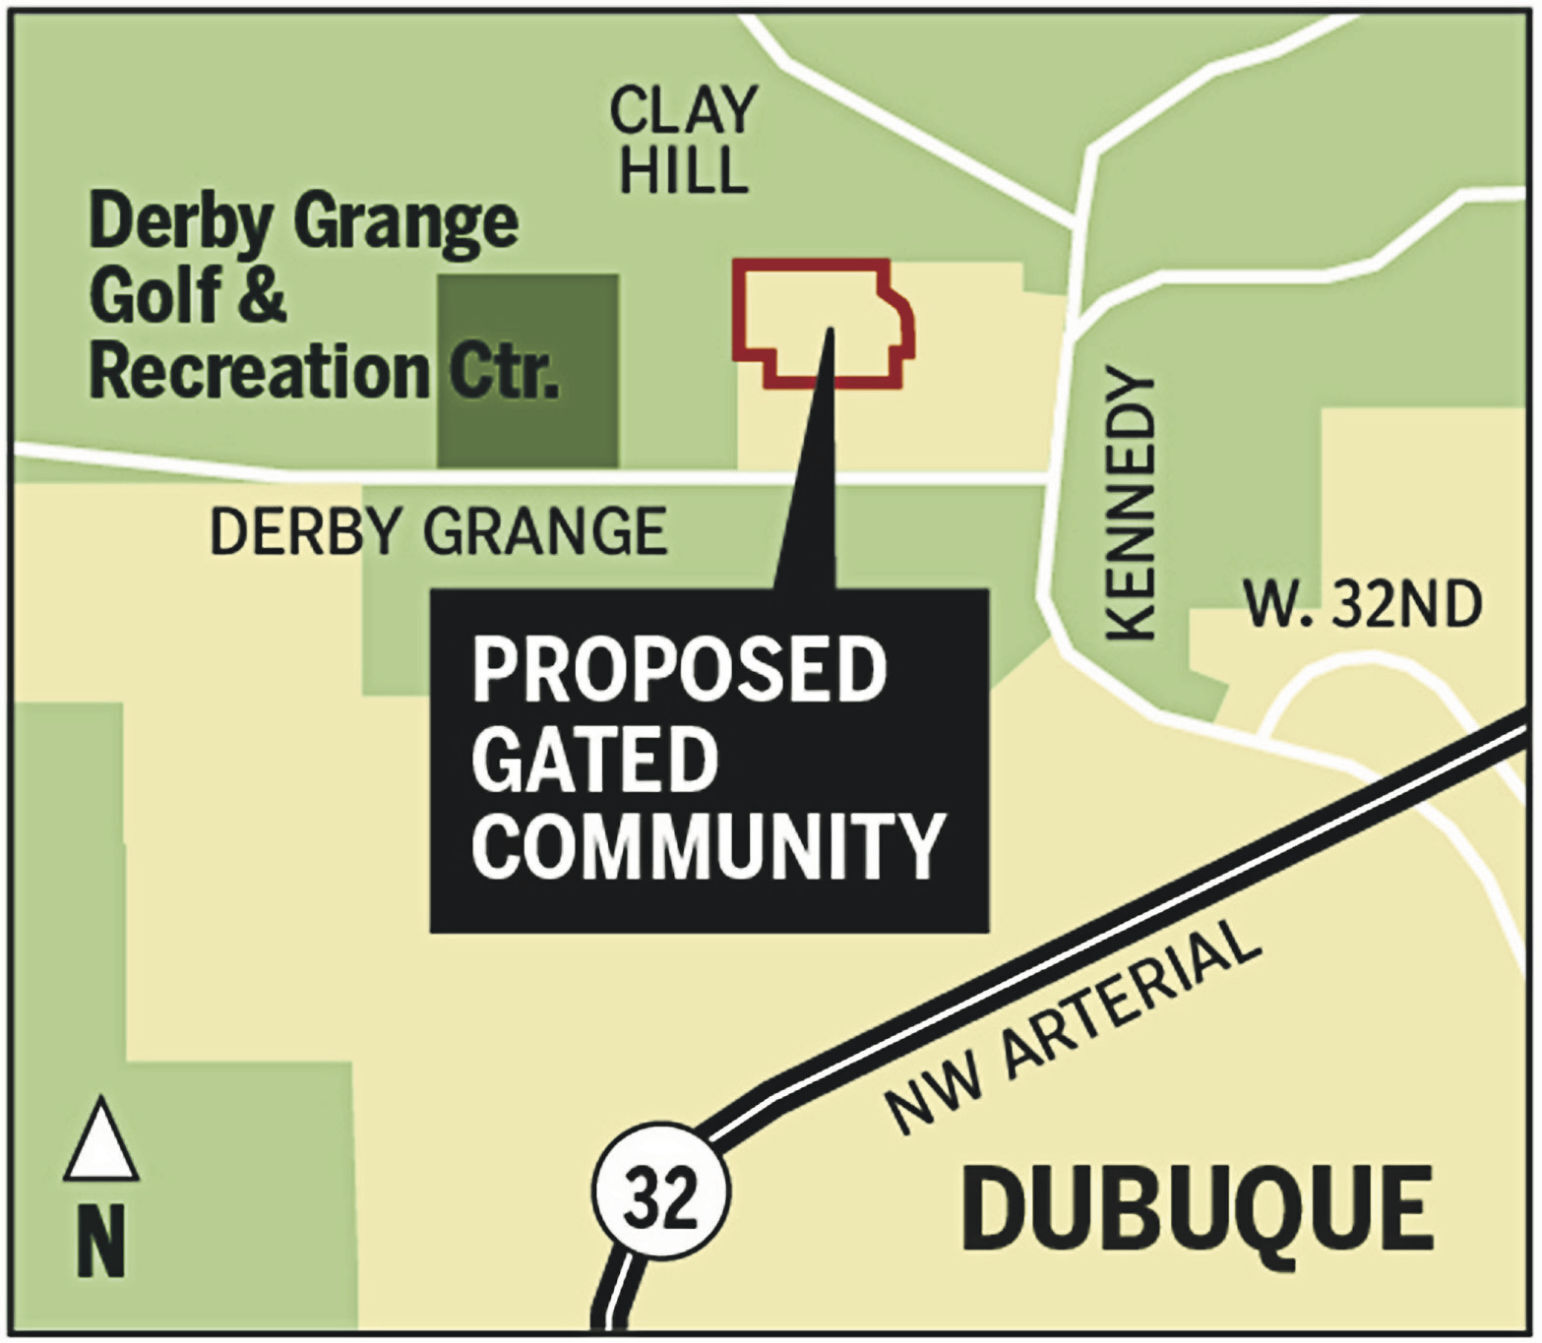 A gated community has been proposed north of Derby Grange Road in Dubuque.    PHOTO CREDIT: Mike Day